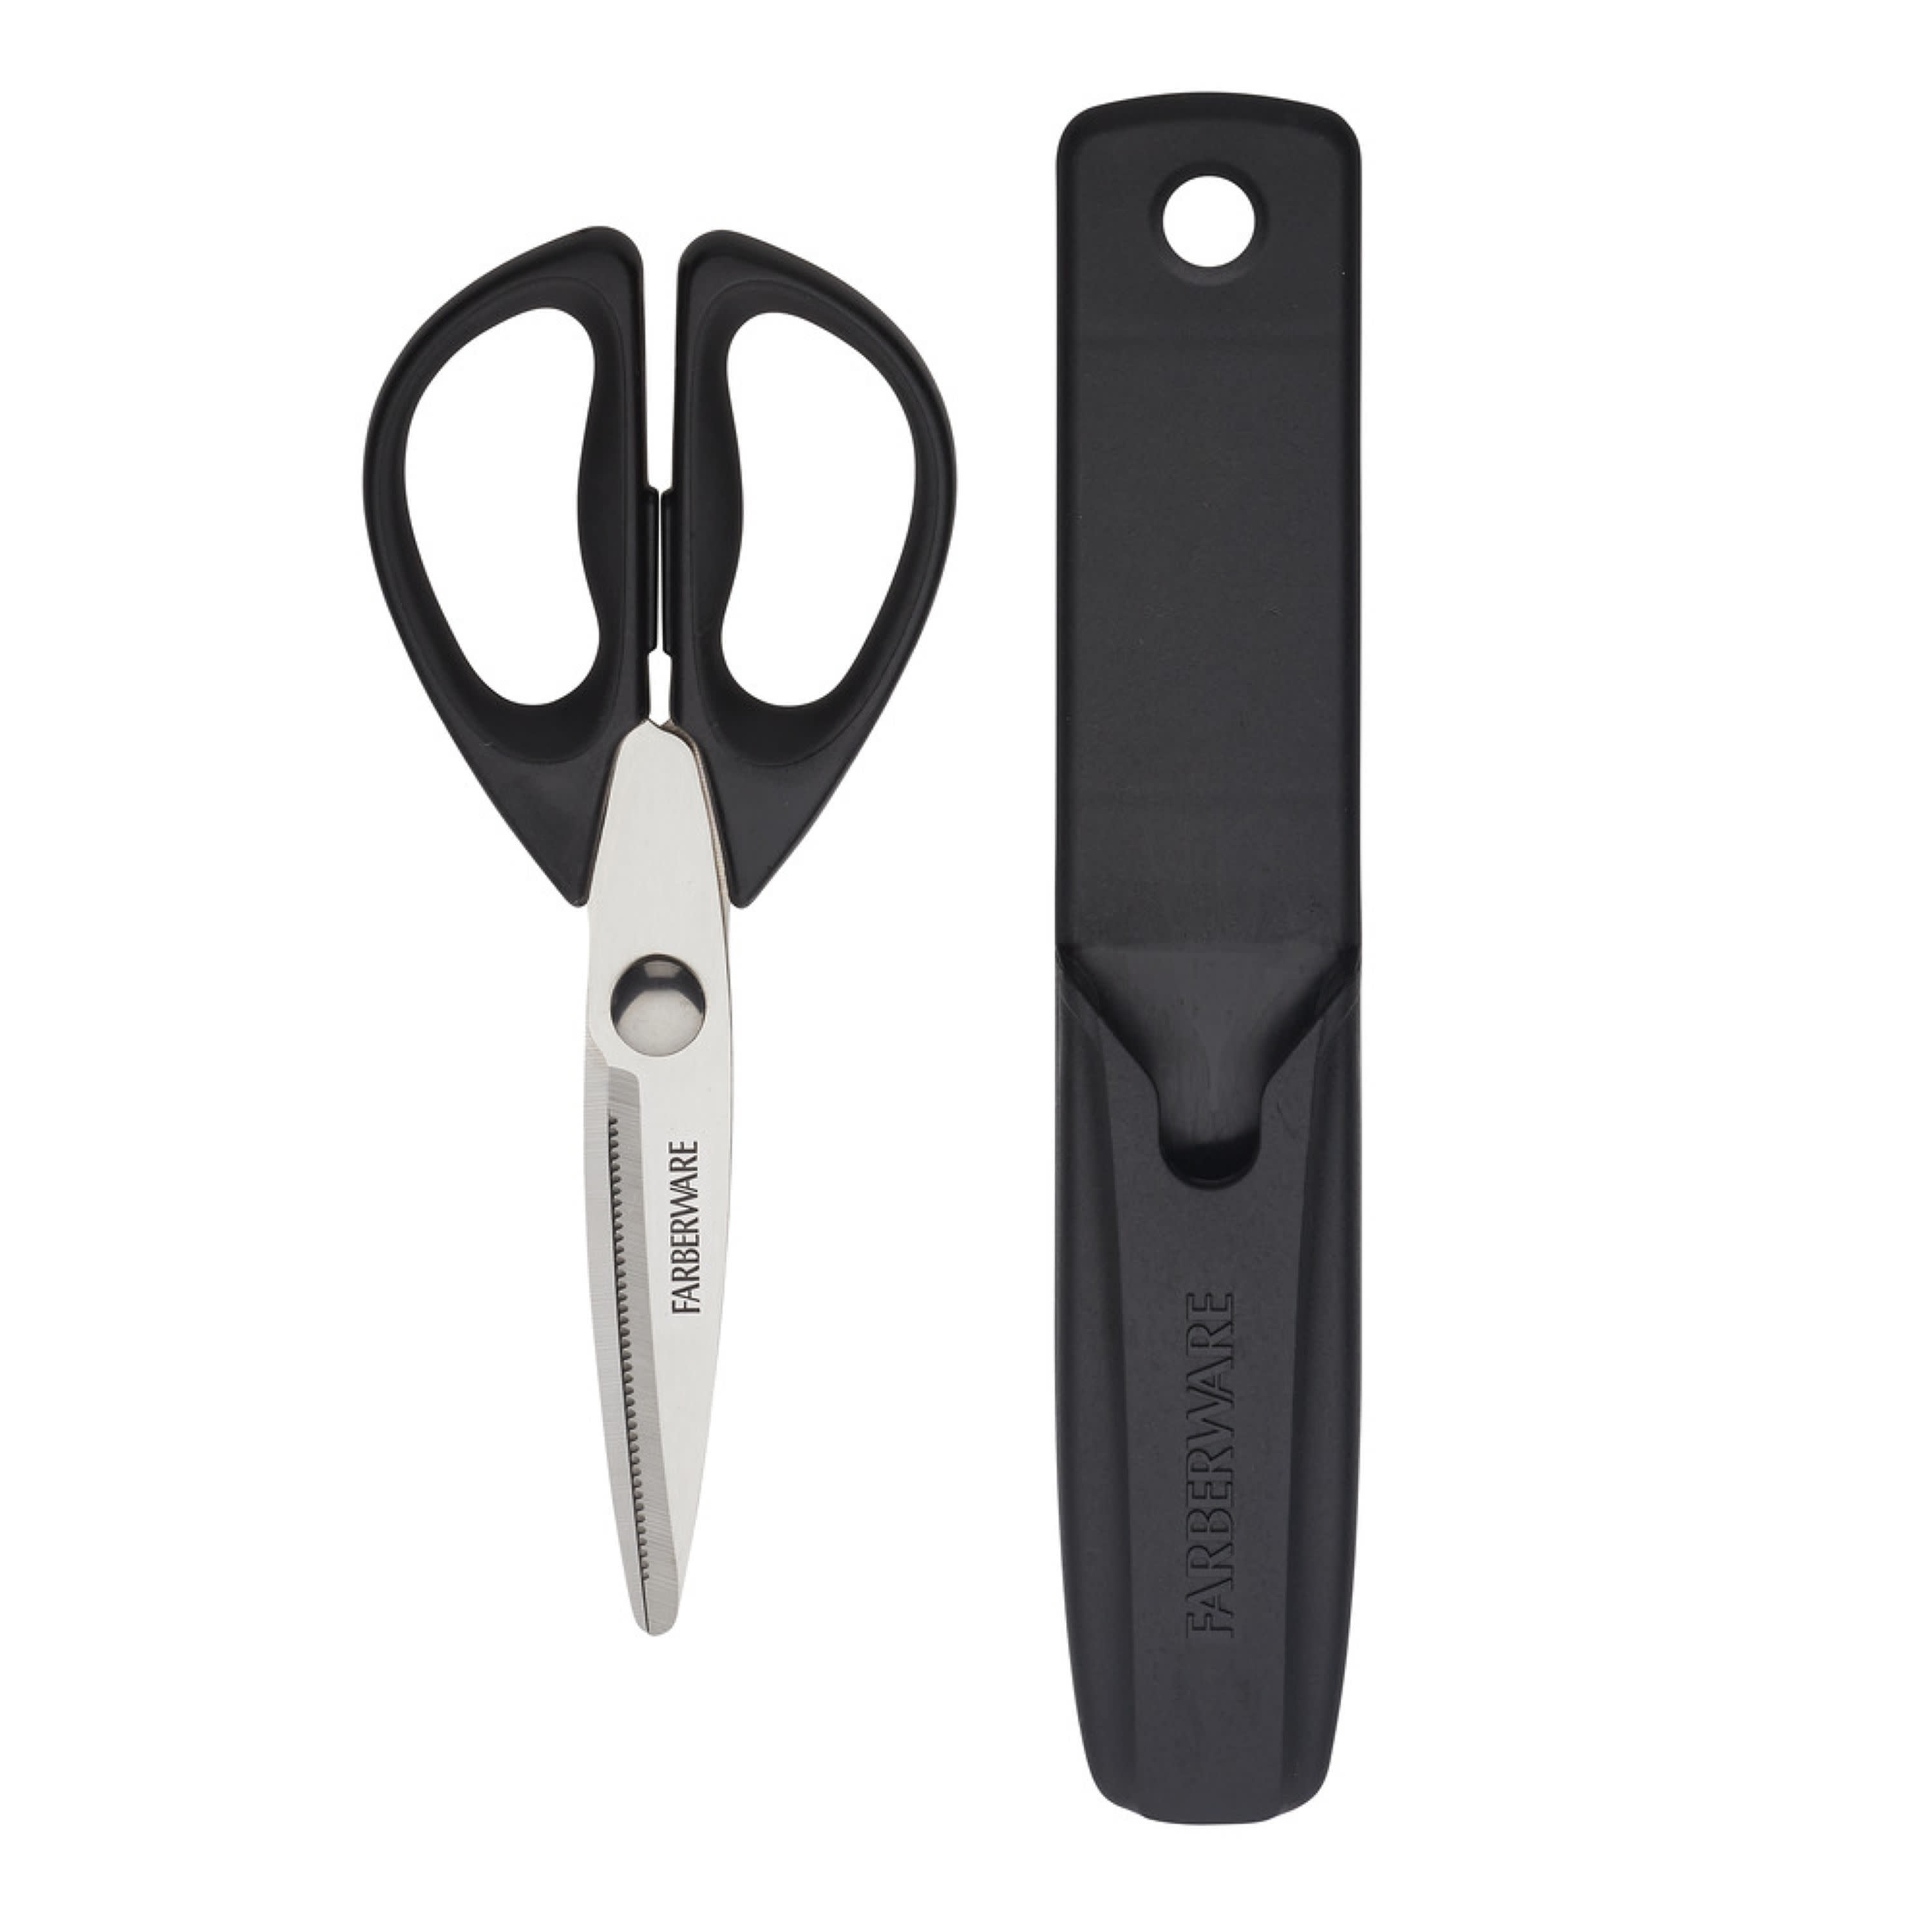 Linoroso Kitchen Scissors Heavy Duty Kitchen Shears with Magnetic Holder Made with Japanese Steel 4034 - Graphic,Tiger